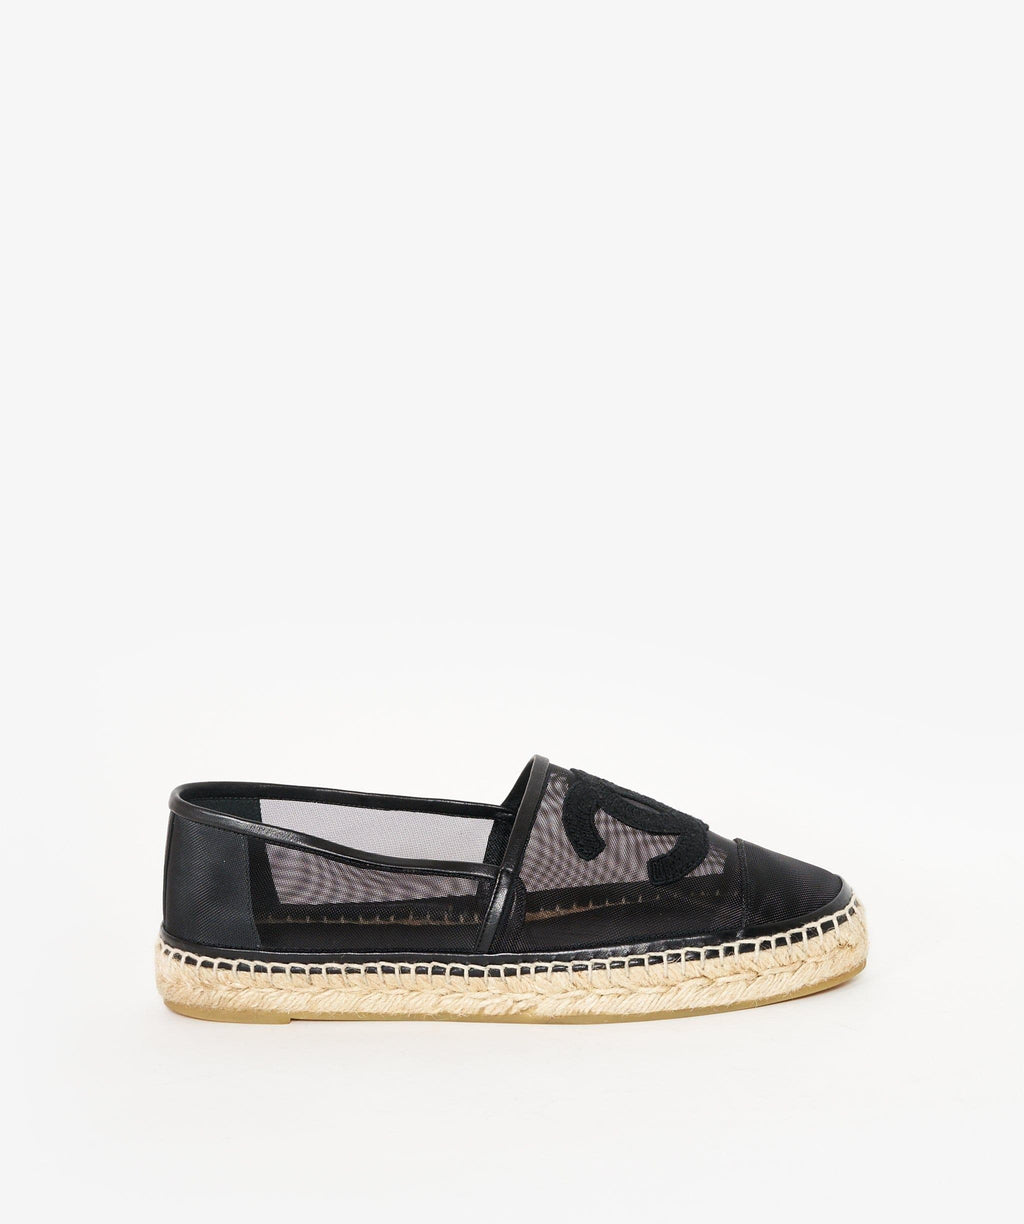 Chanel espadrille outfit, Chanel square mini, white off the